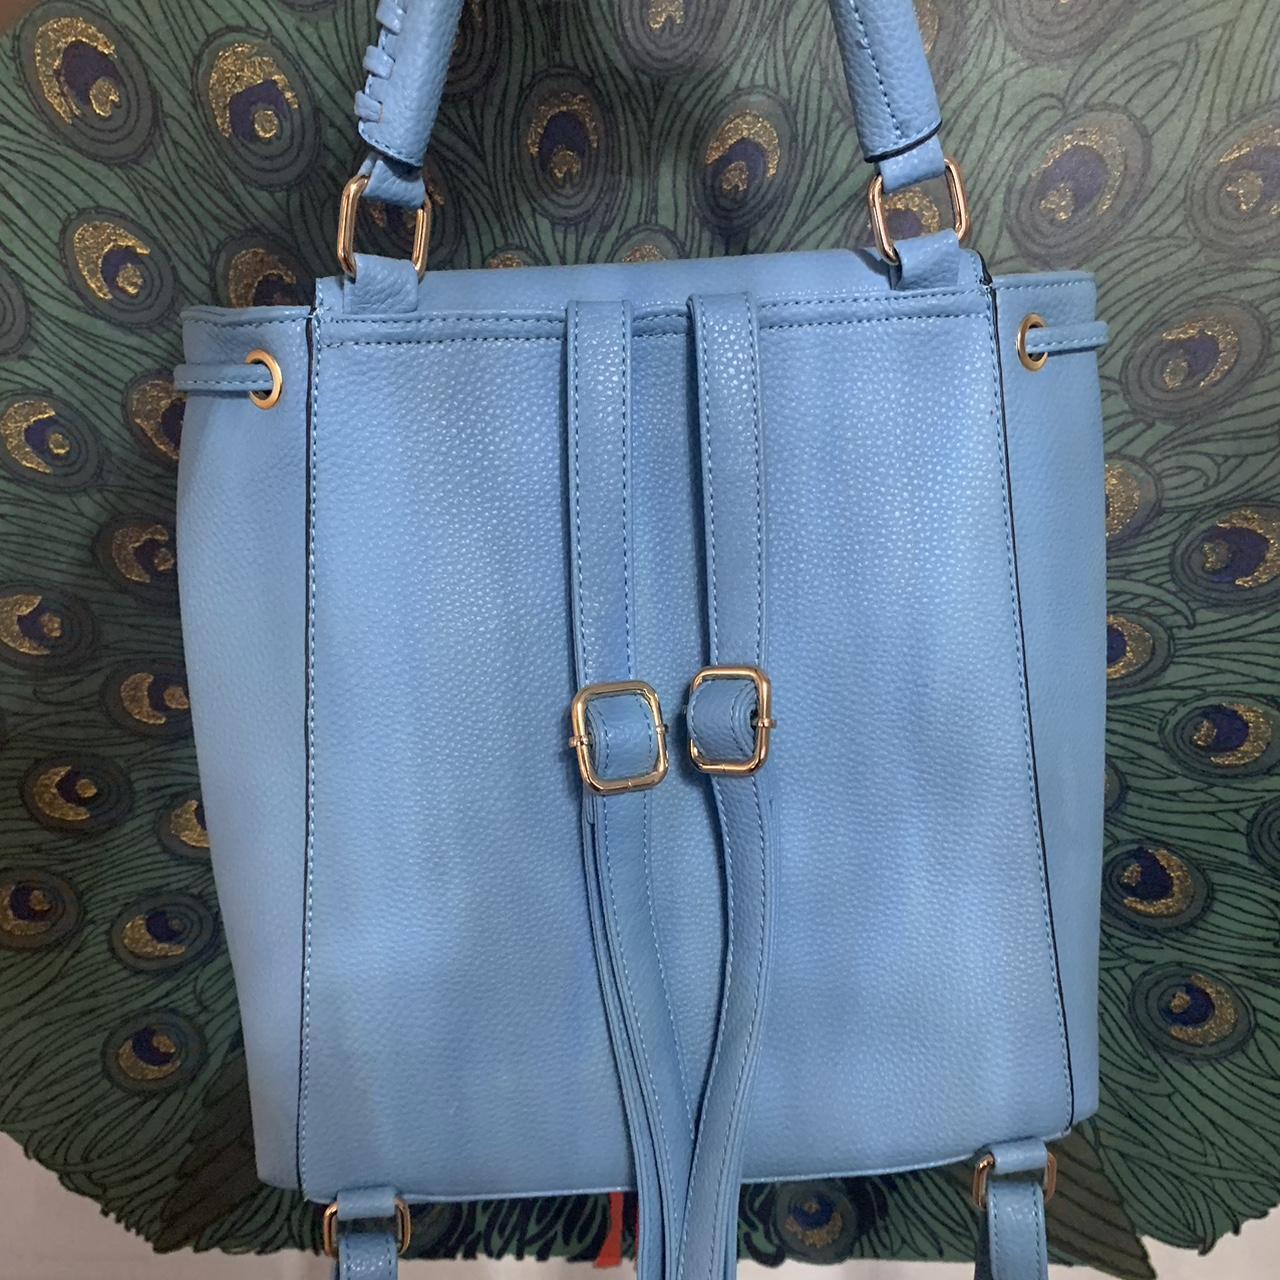 Robins Egg Blue Backpack , BRAND NEW Perfect for the